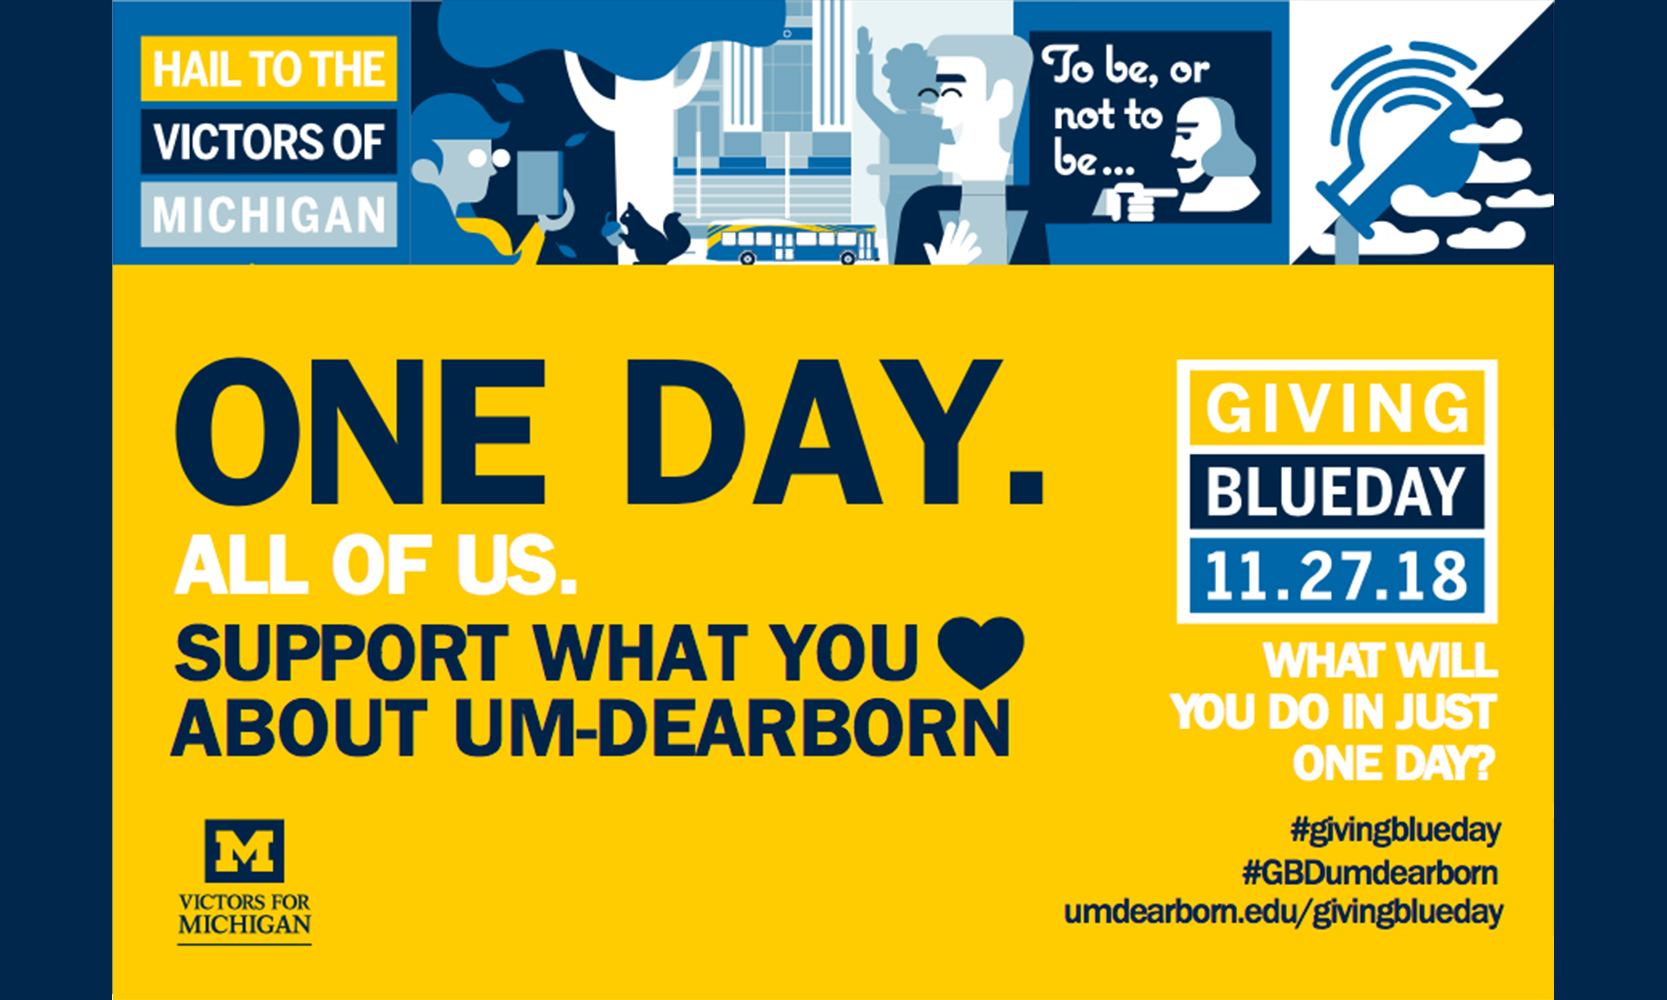 Poster for Giving Blueday, 11.27.18. One Day. All of Us. Support What you <heart> about UM-Dearborn. Hail, to the victors of Michigan.